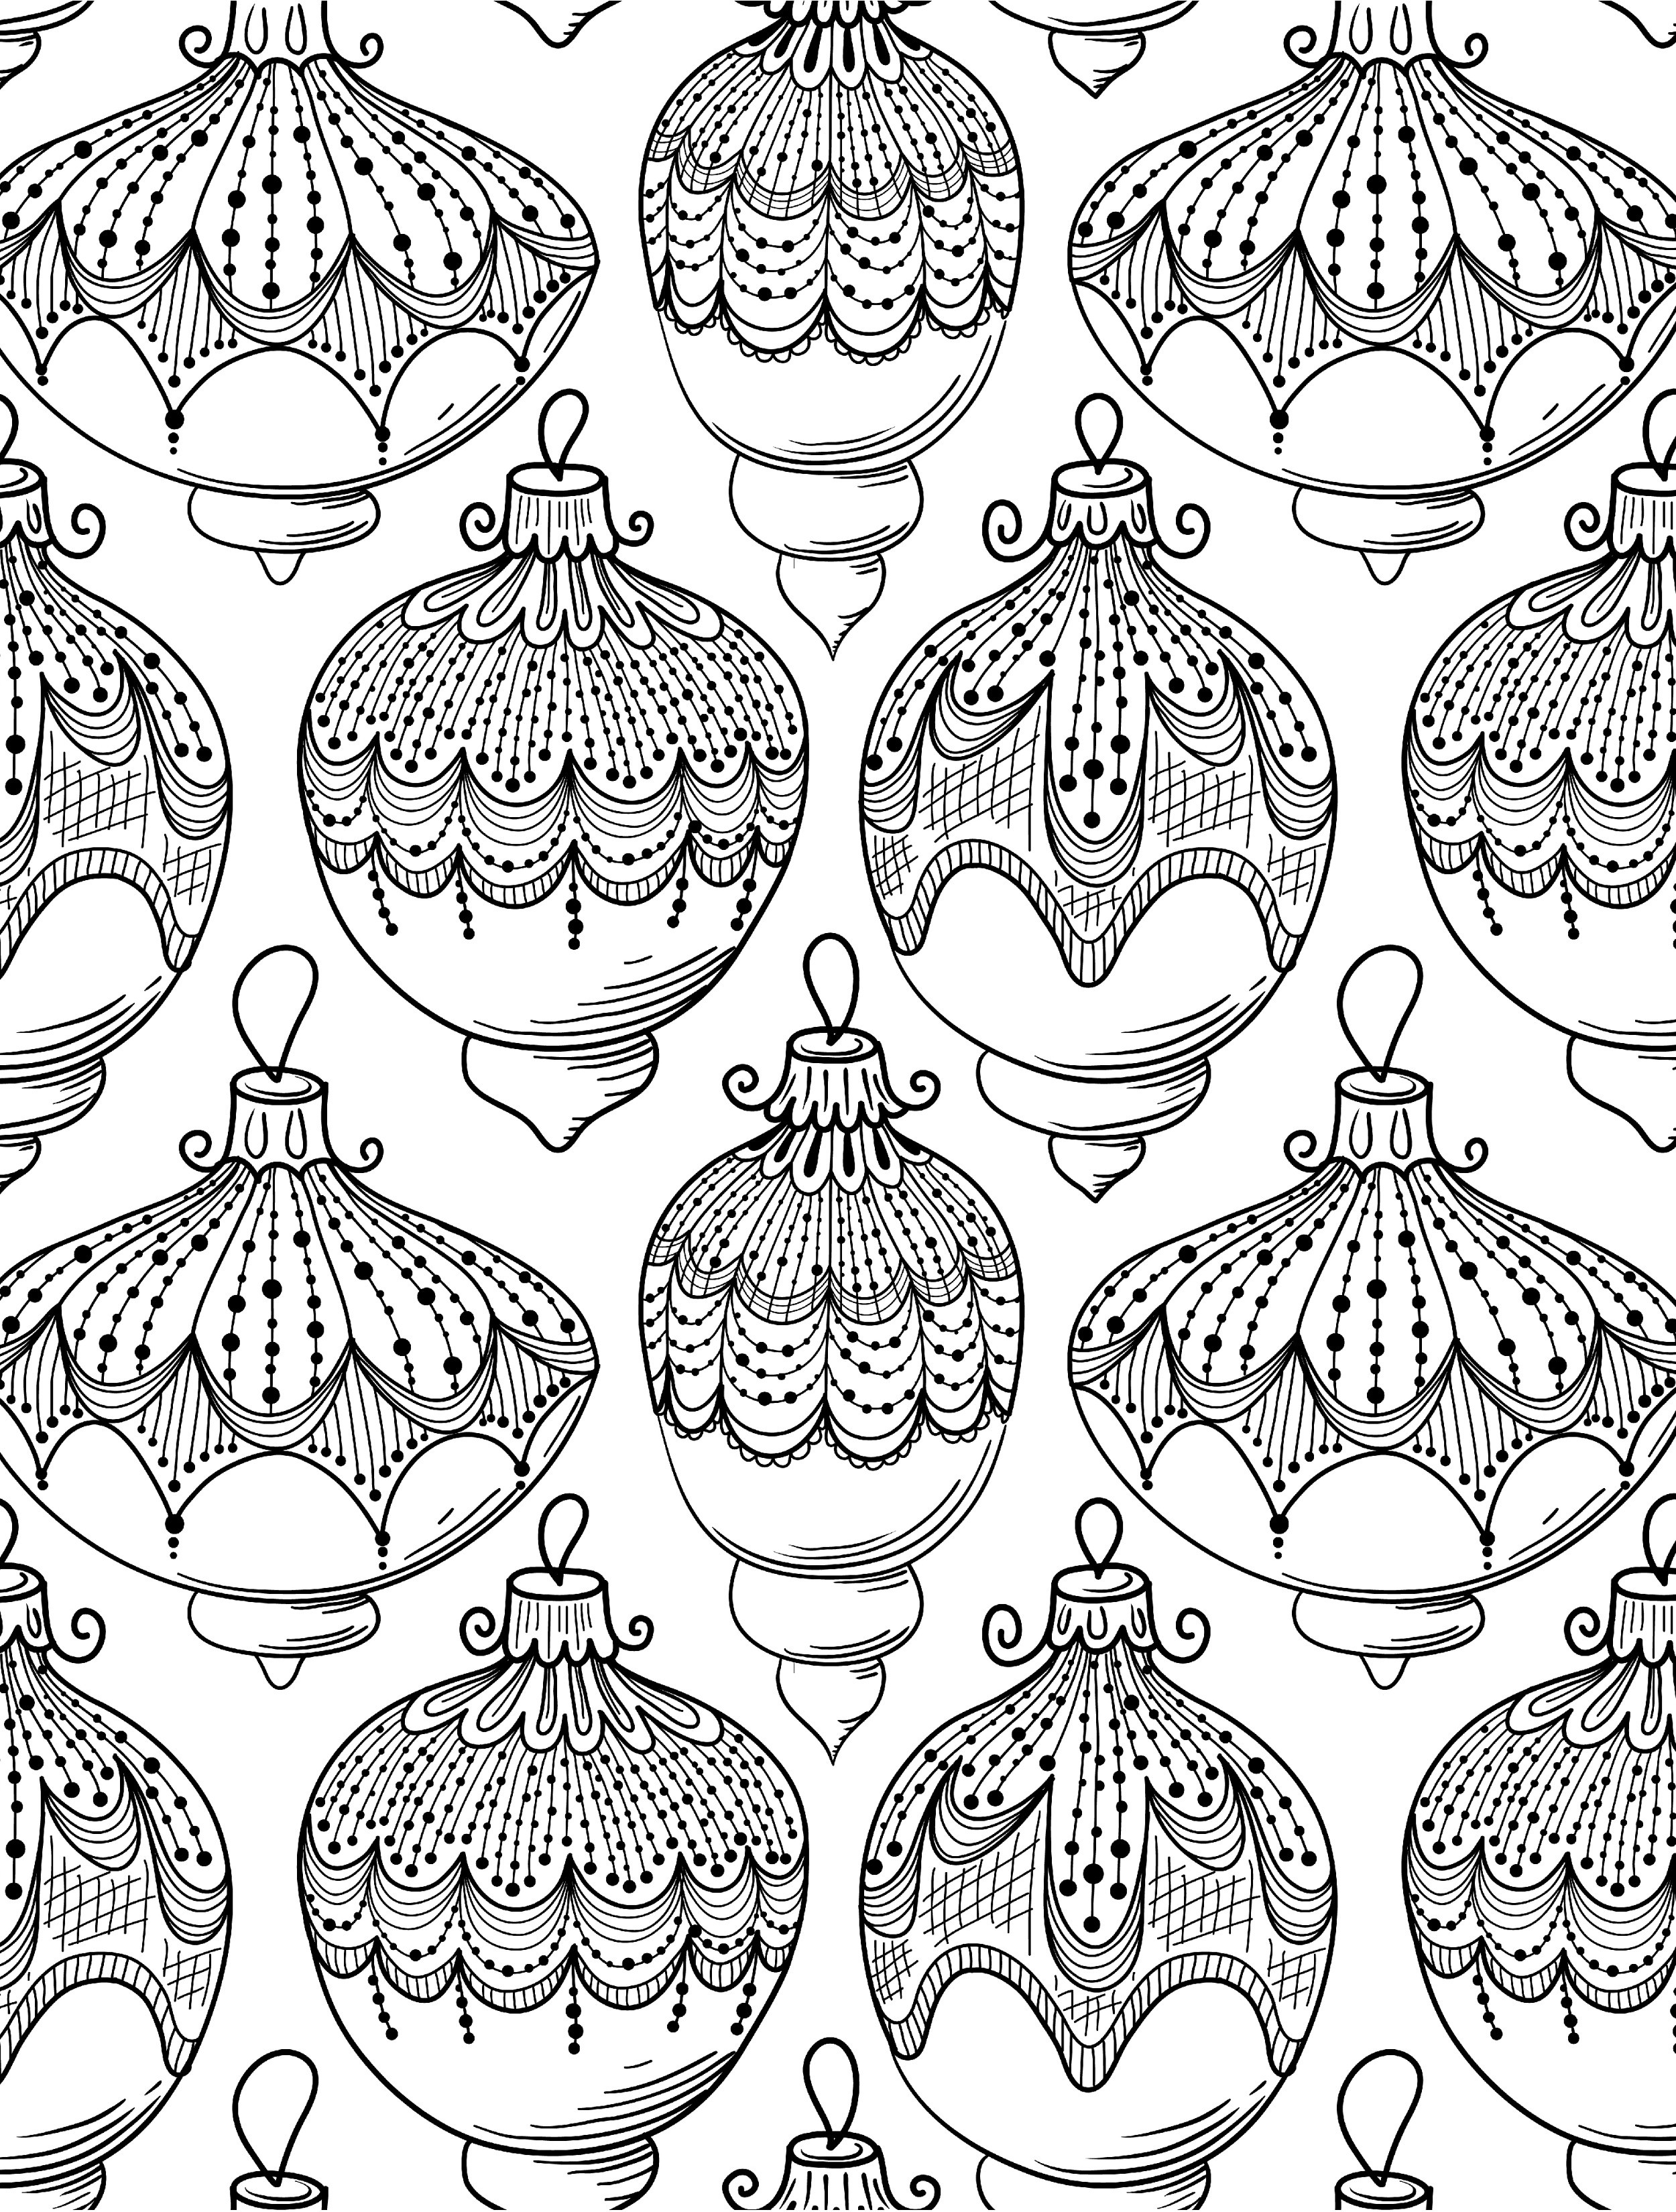 Winter Coloring Pages Adults
 Winter Coloring Pages for Adults Best Coloring Pages For